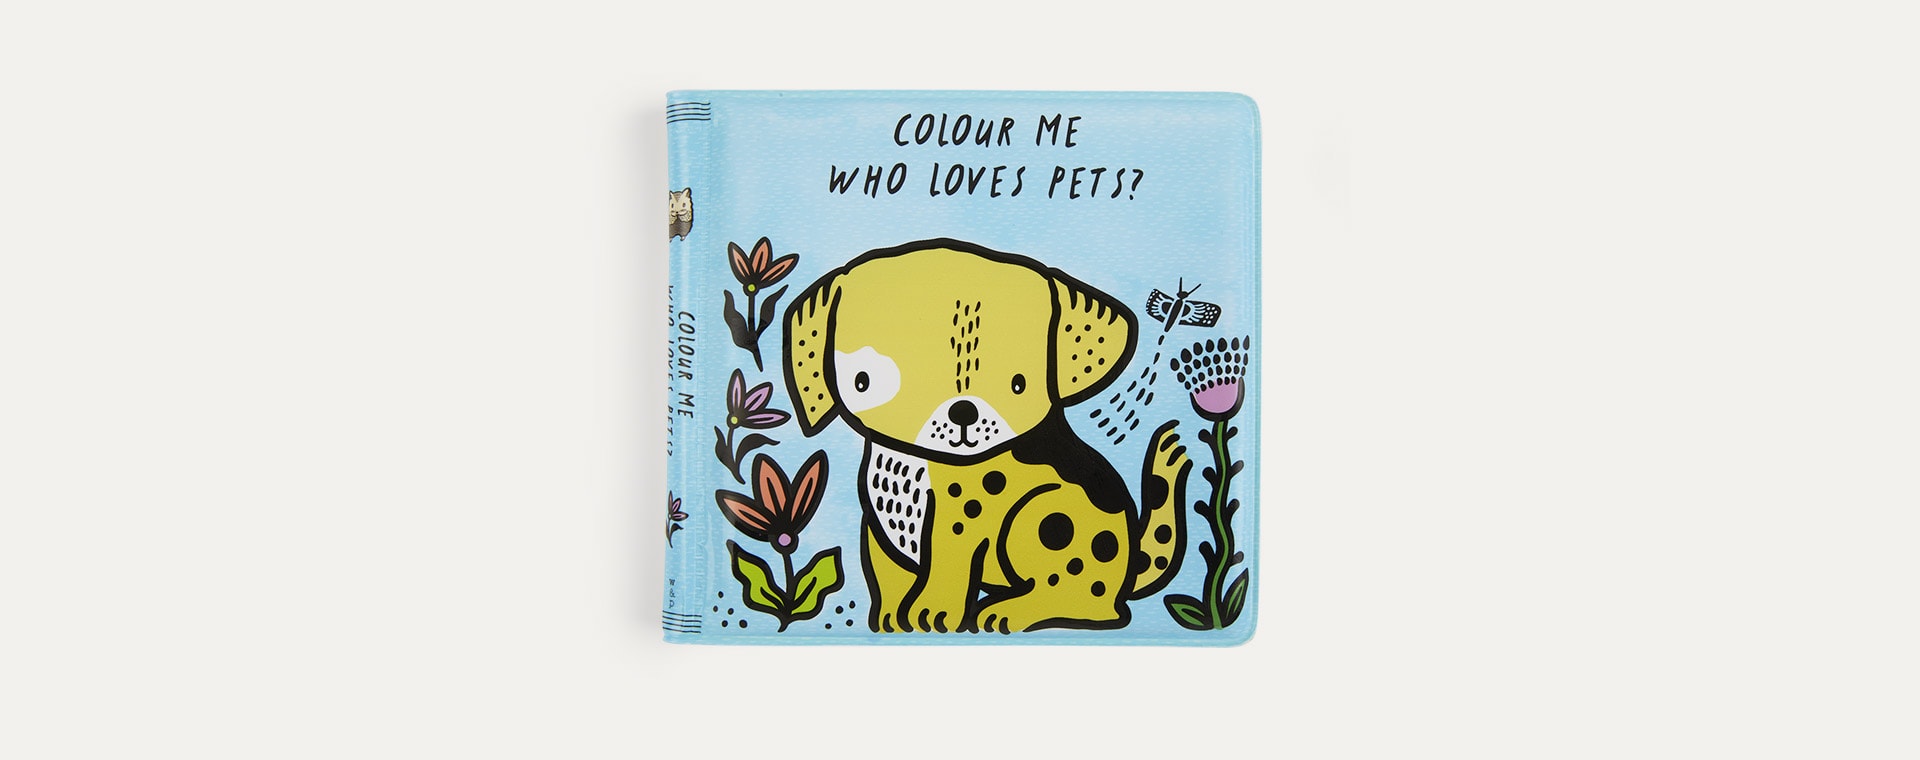 Pets Wee Gallery Colour Me Bath Book